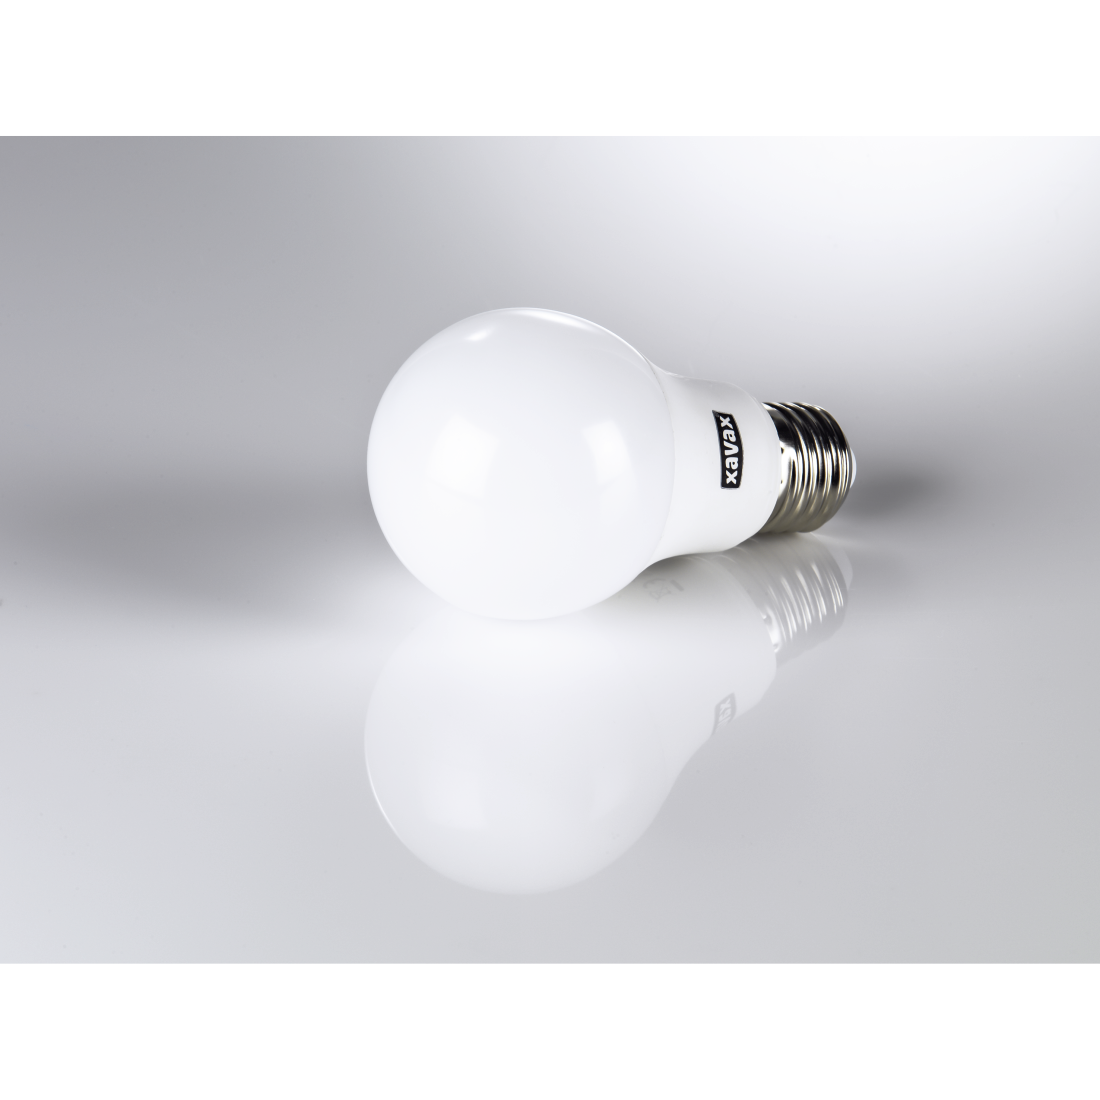 abx3 High-Res Image 3 - Xavax, LED Bulb, E27, 470lm replaces 40W, incandescent bulb, warm, dimmable